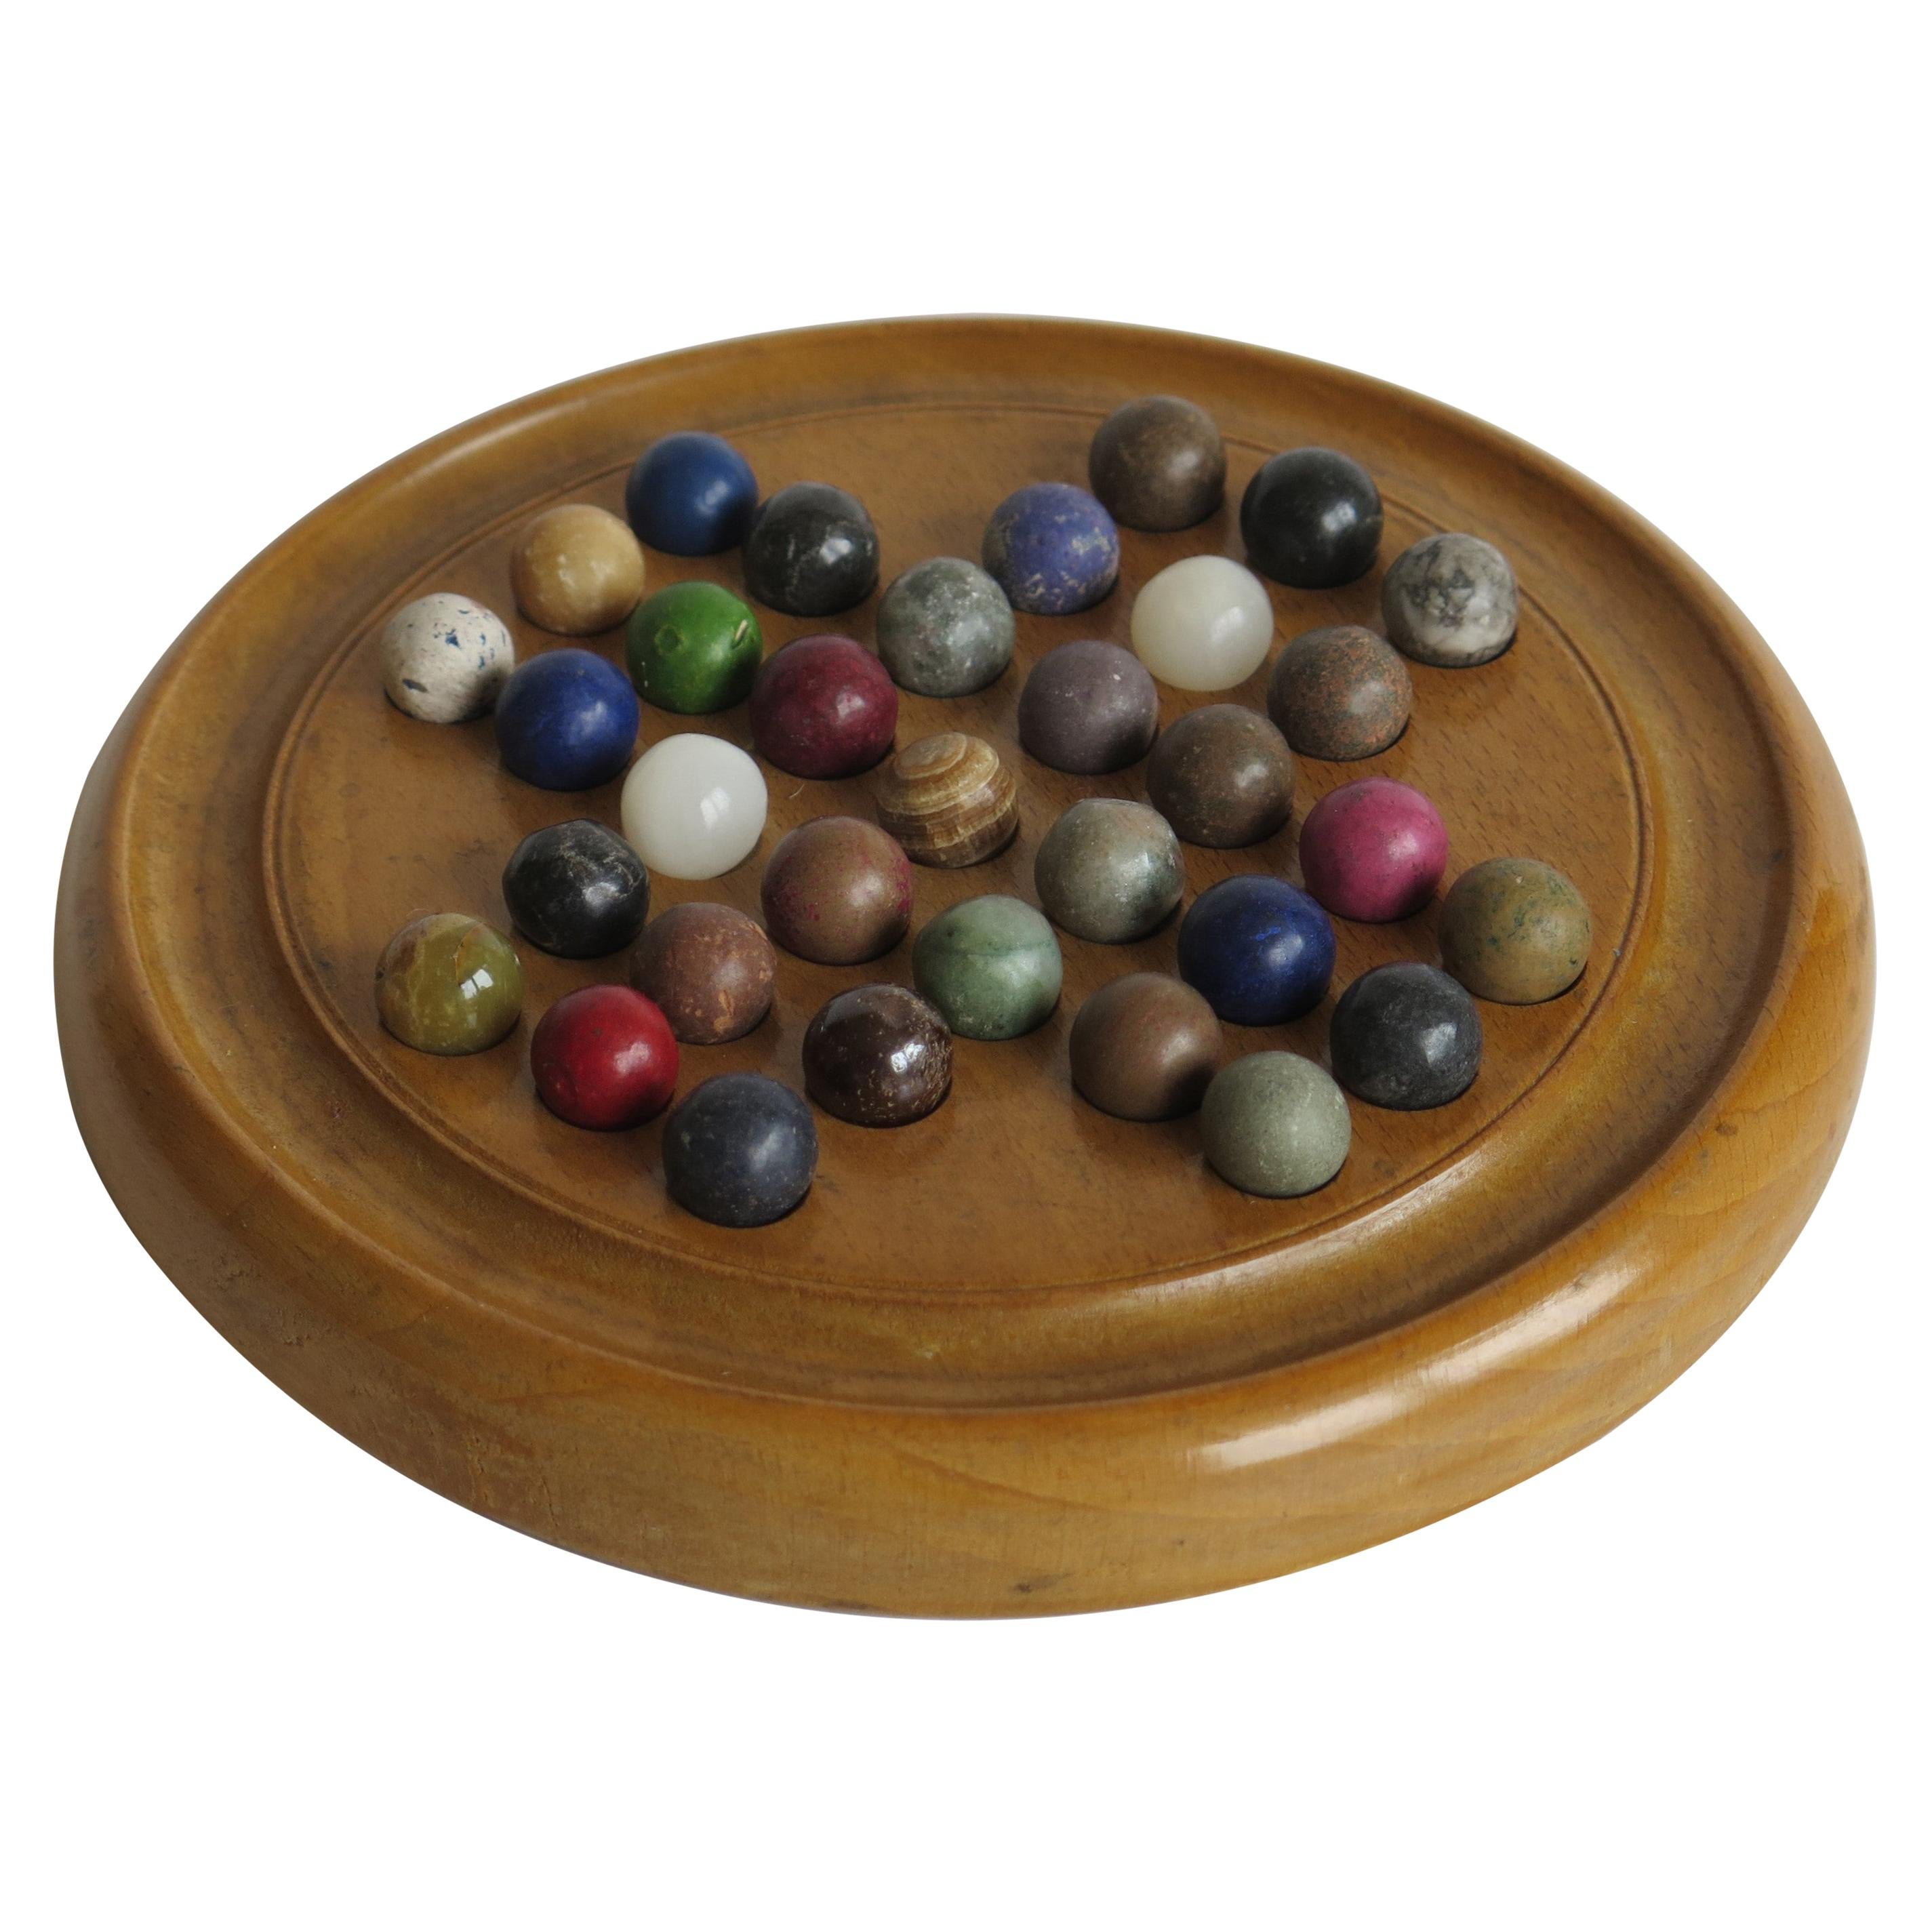 Late 19th Century Marble Solitaire Board Game with 33 Handmade Marbles, Ca 1900